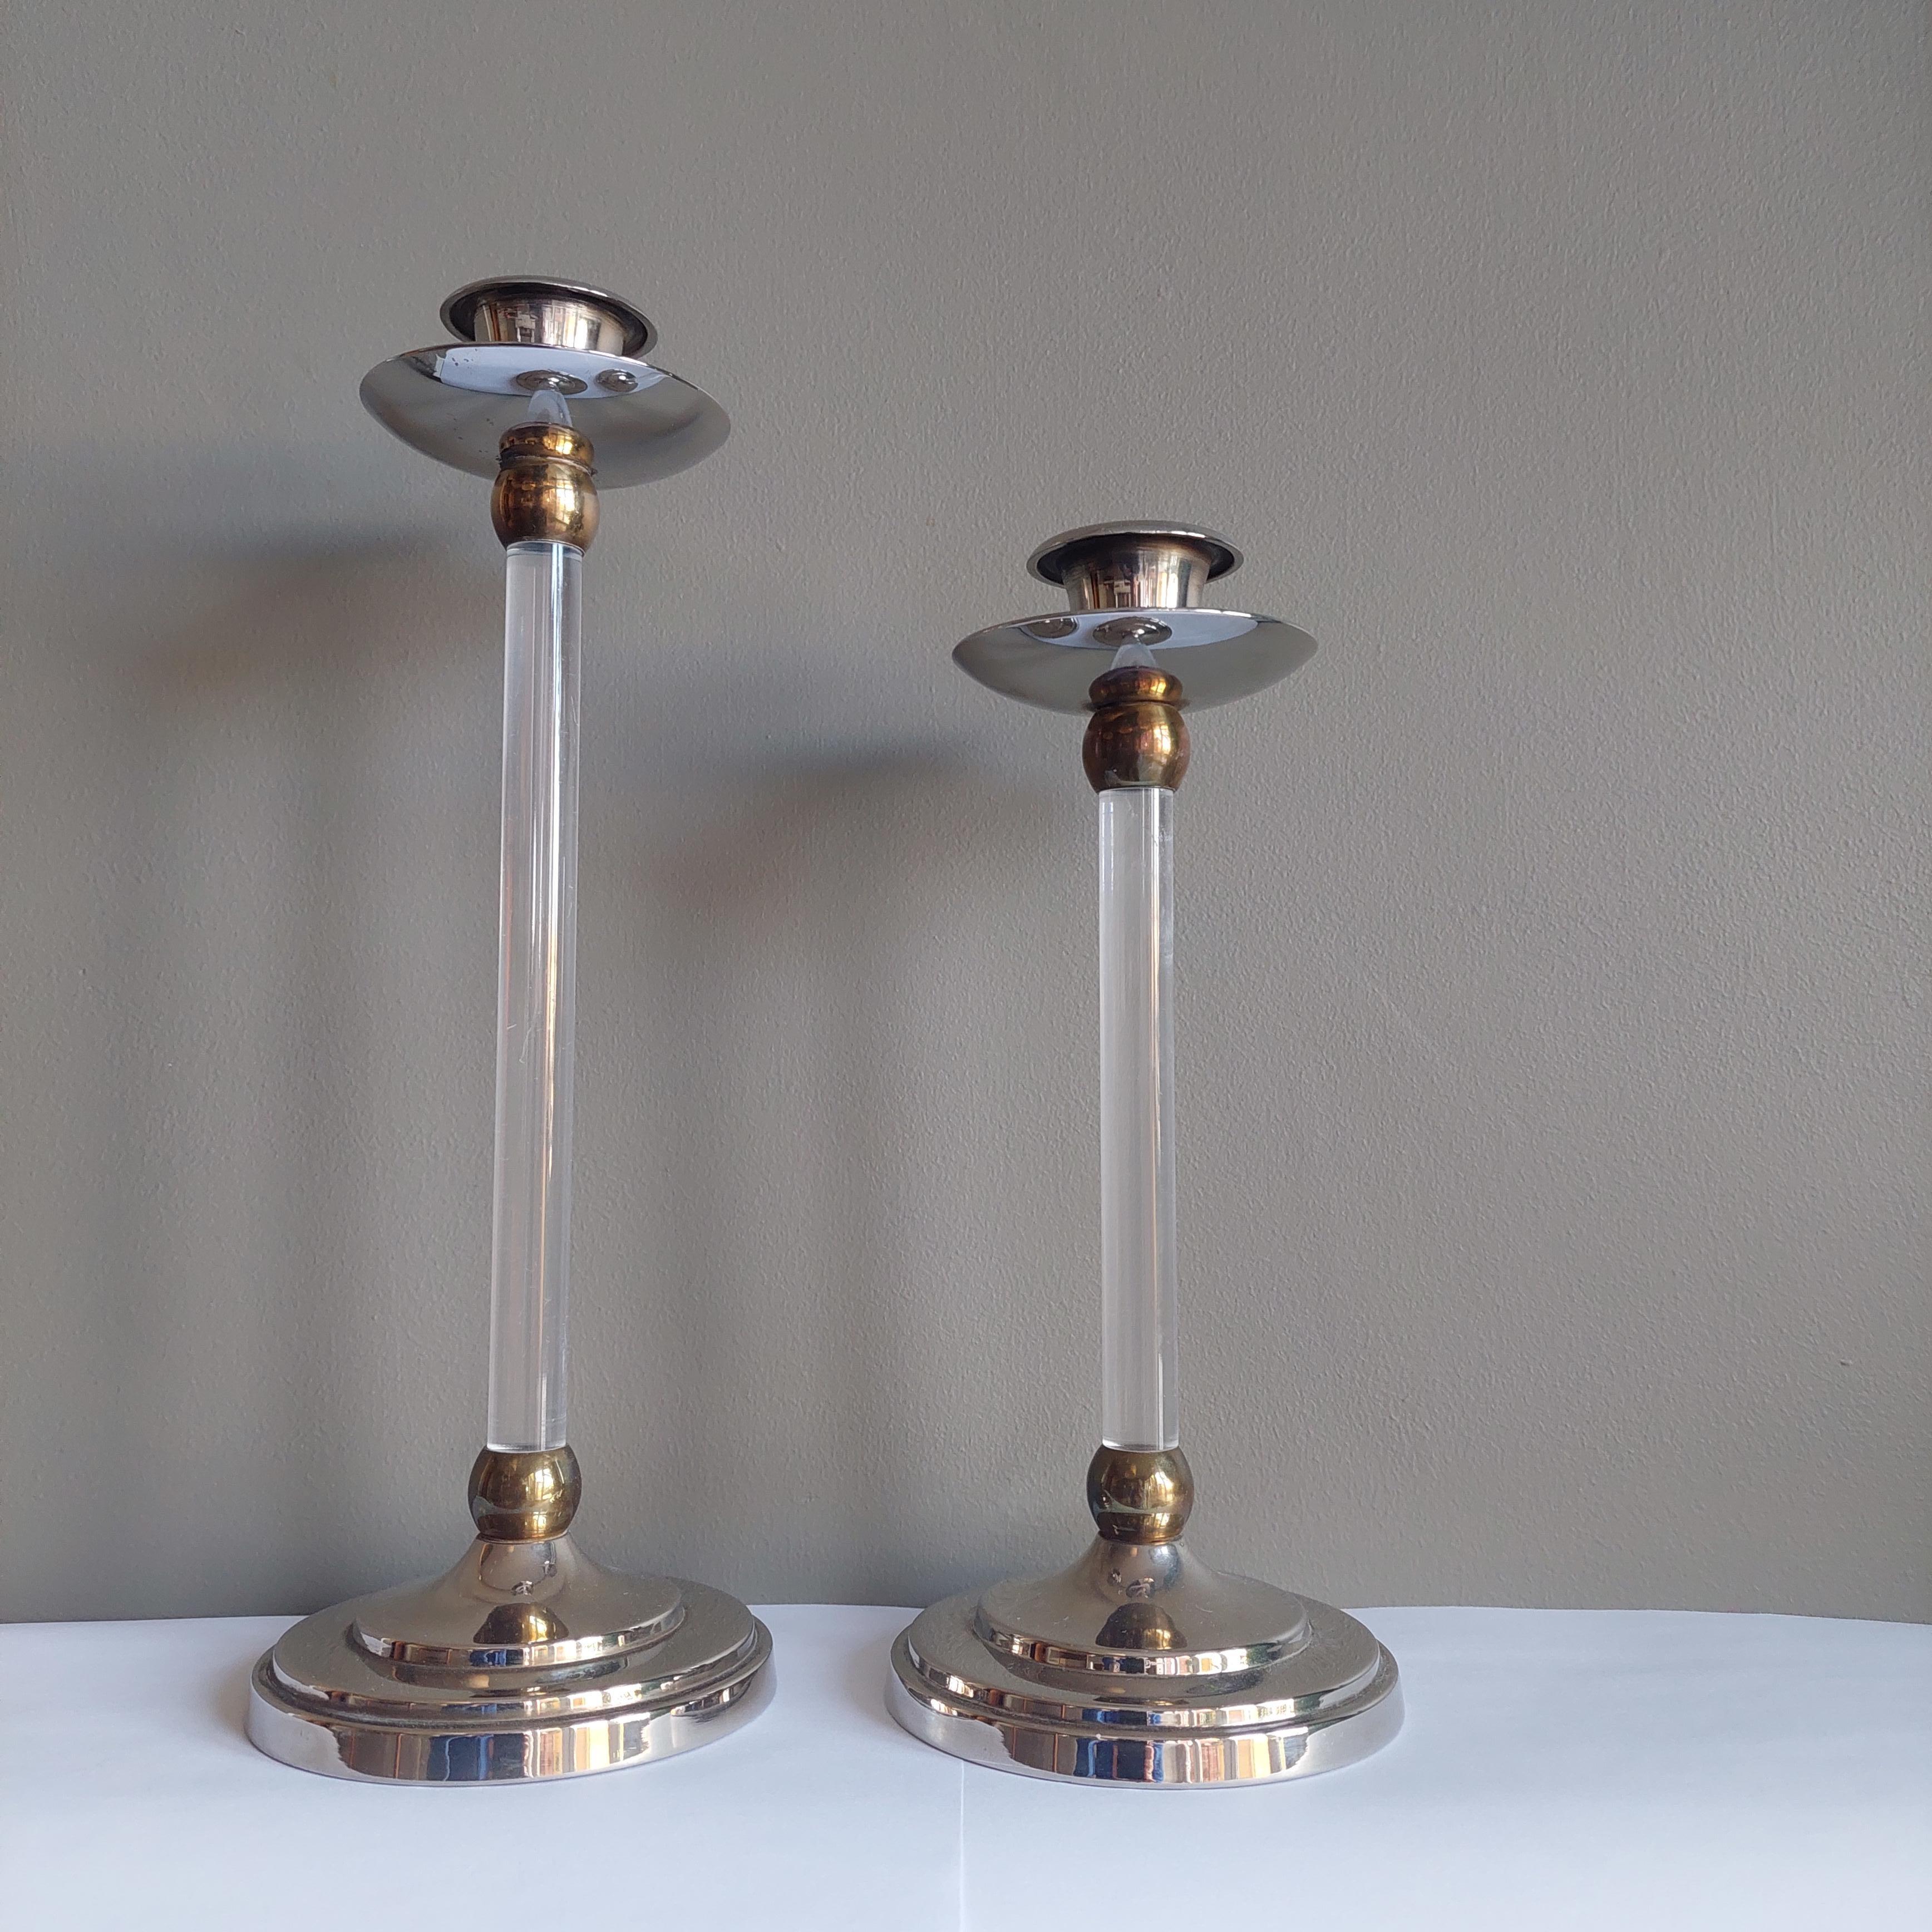 Estrid Ericson, pair of golden and silver brass candlesticks. 
Circular base molded in silver varnish and surmounted by a cylindrical plexiglass shaft decorated with two brass rings at each end. 
The two candlesticks end with a cup and a silver